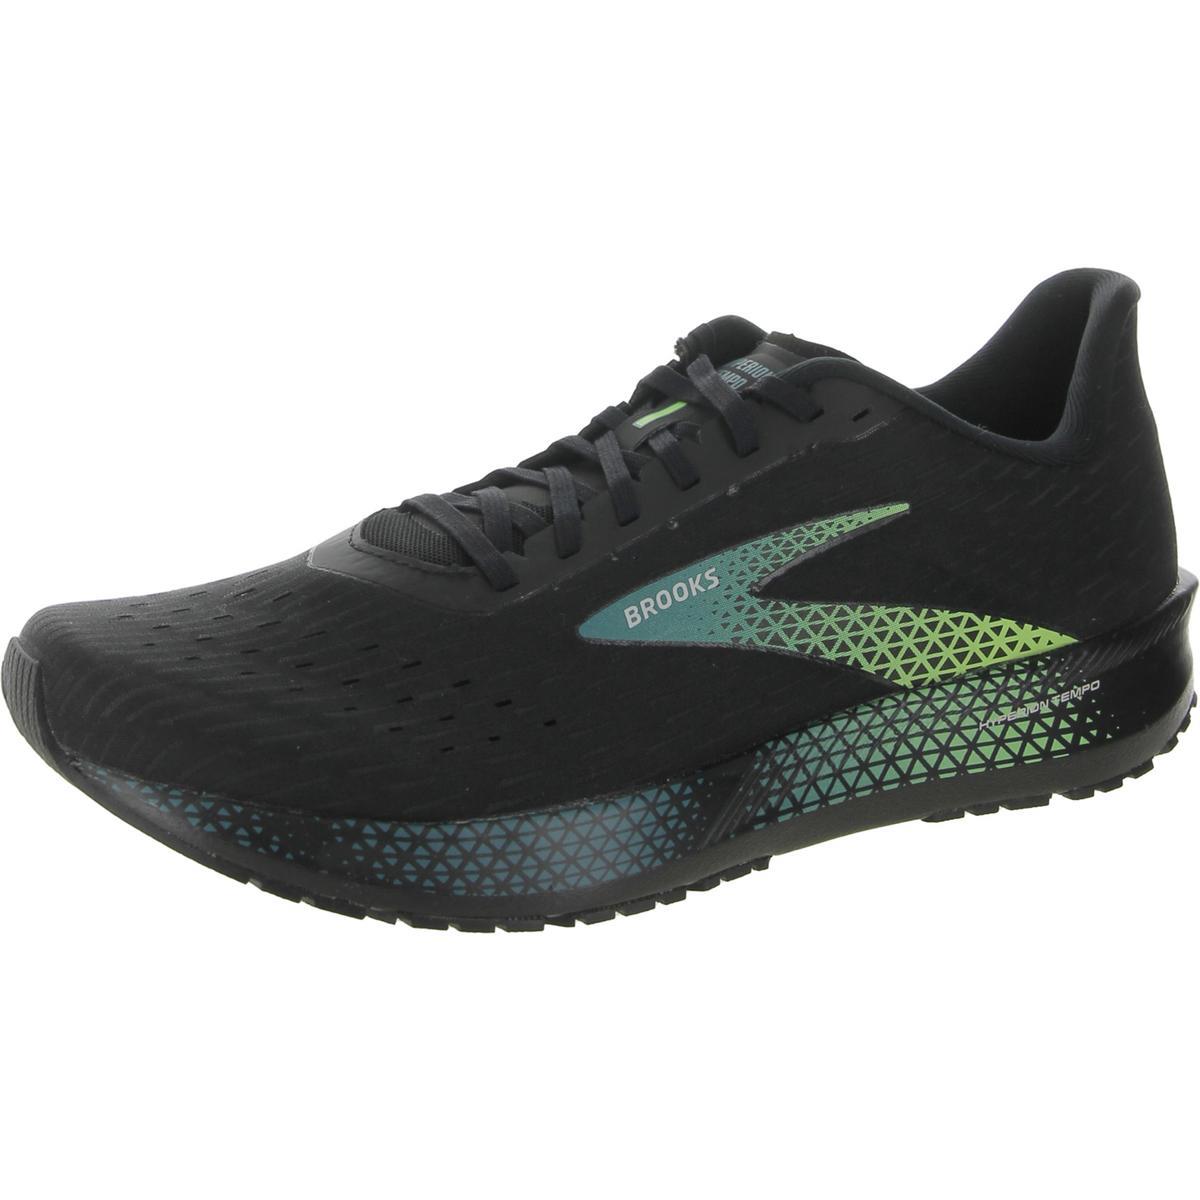 Brooks Mens Hyperion Tempo Fitness Workout Running Shoes Sneakers Bhfo 8544 Black/Green/Blue